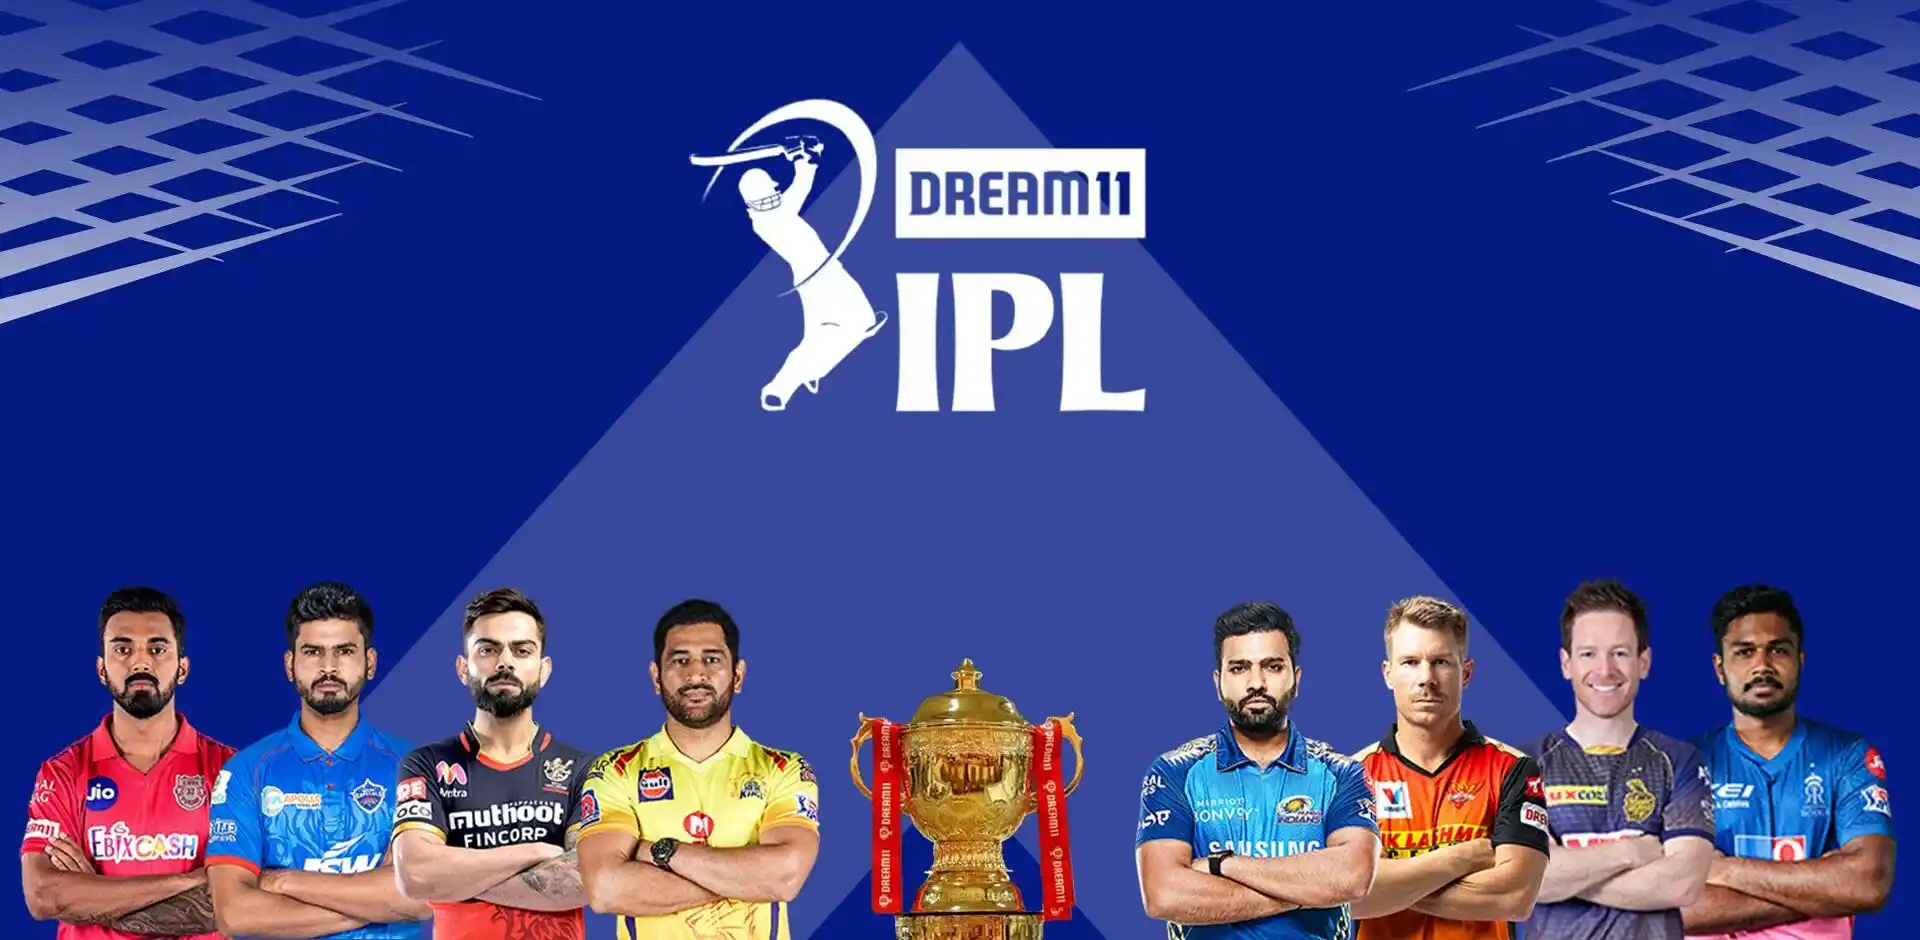 The IPL Is the Best Cricket League in the World